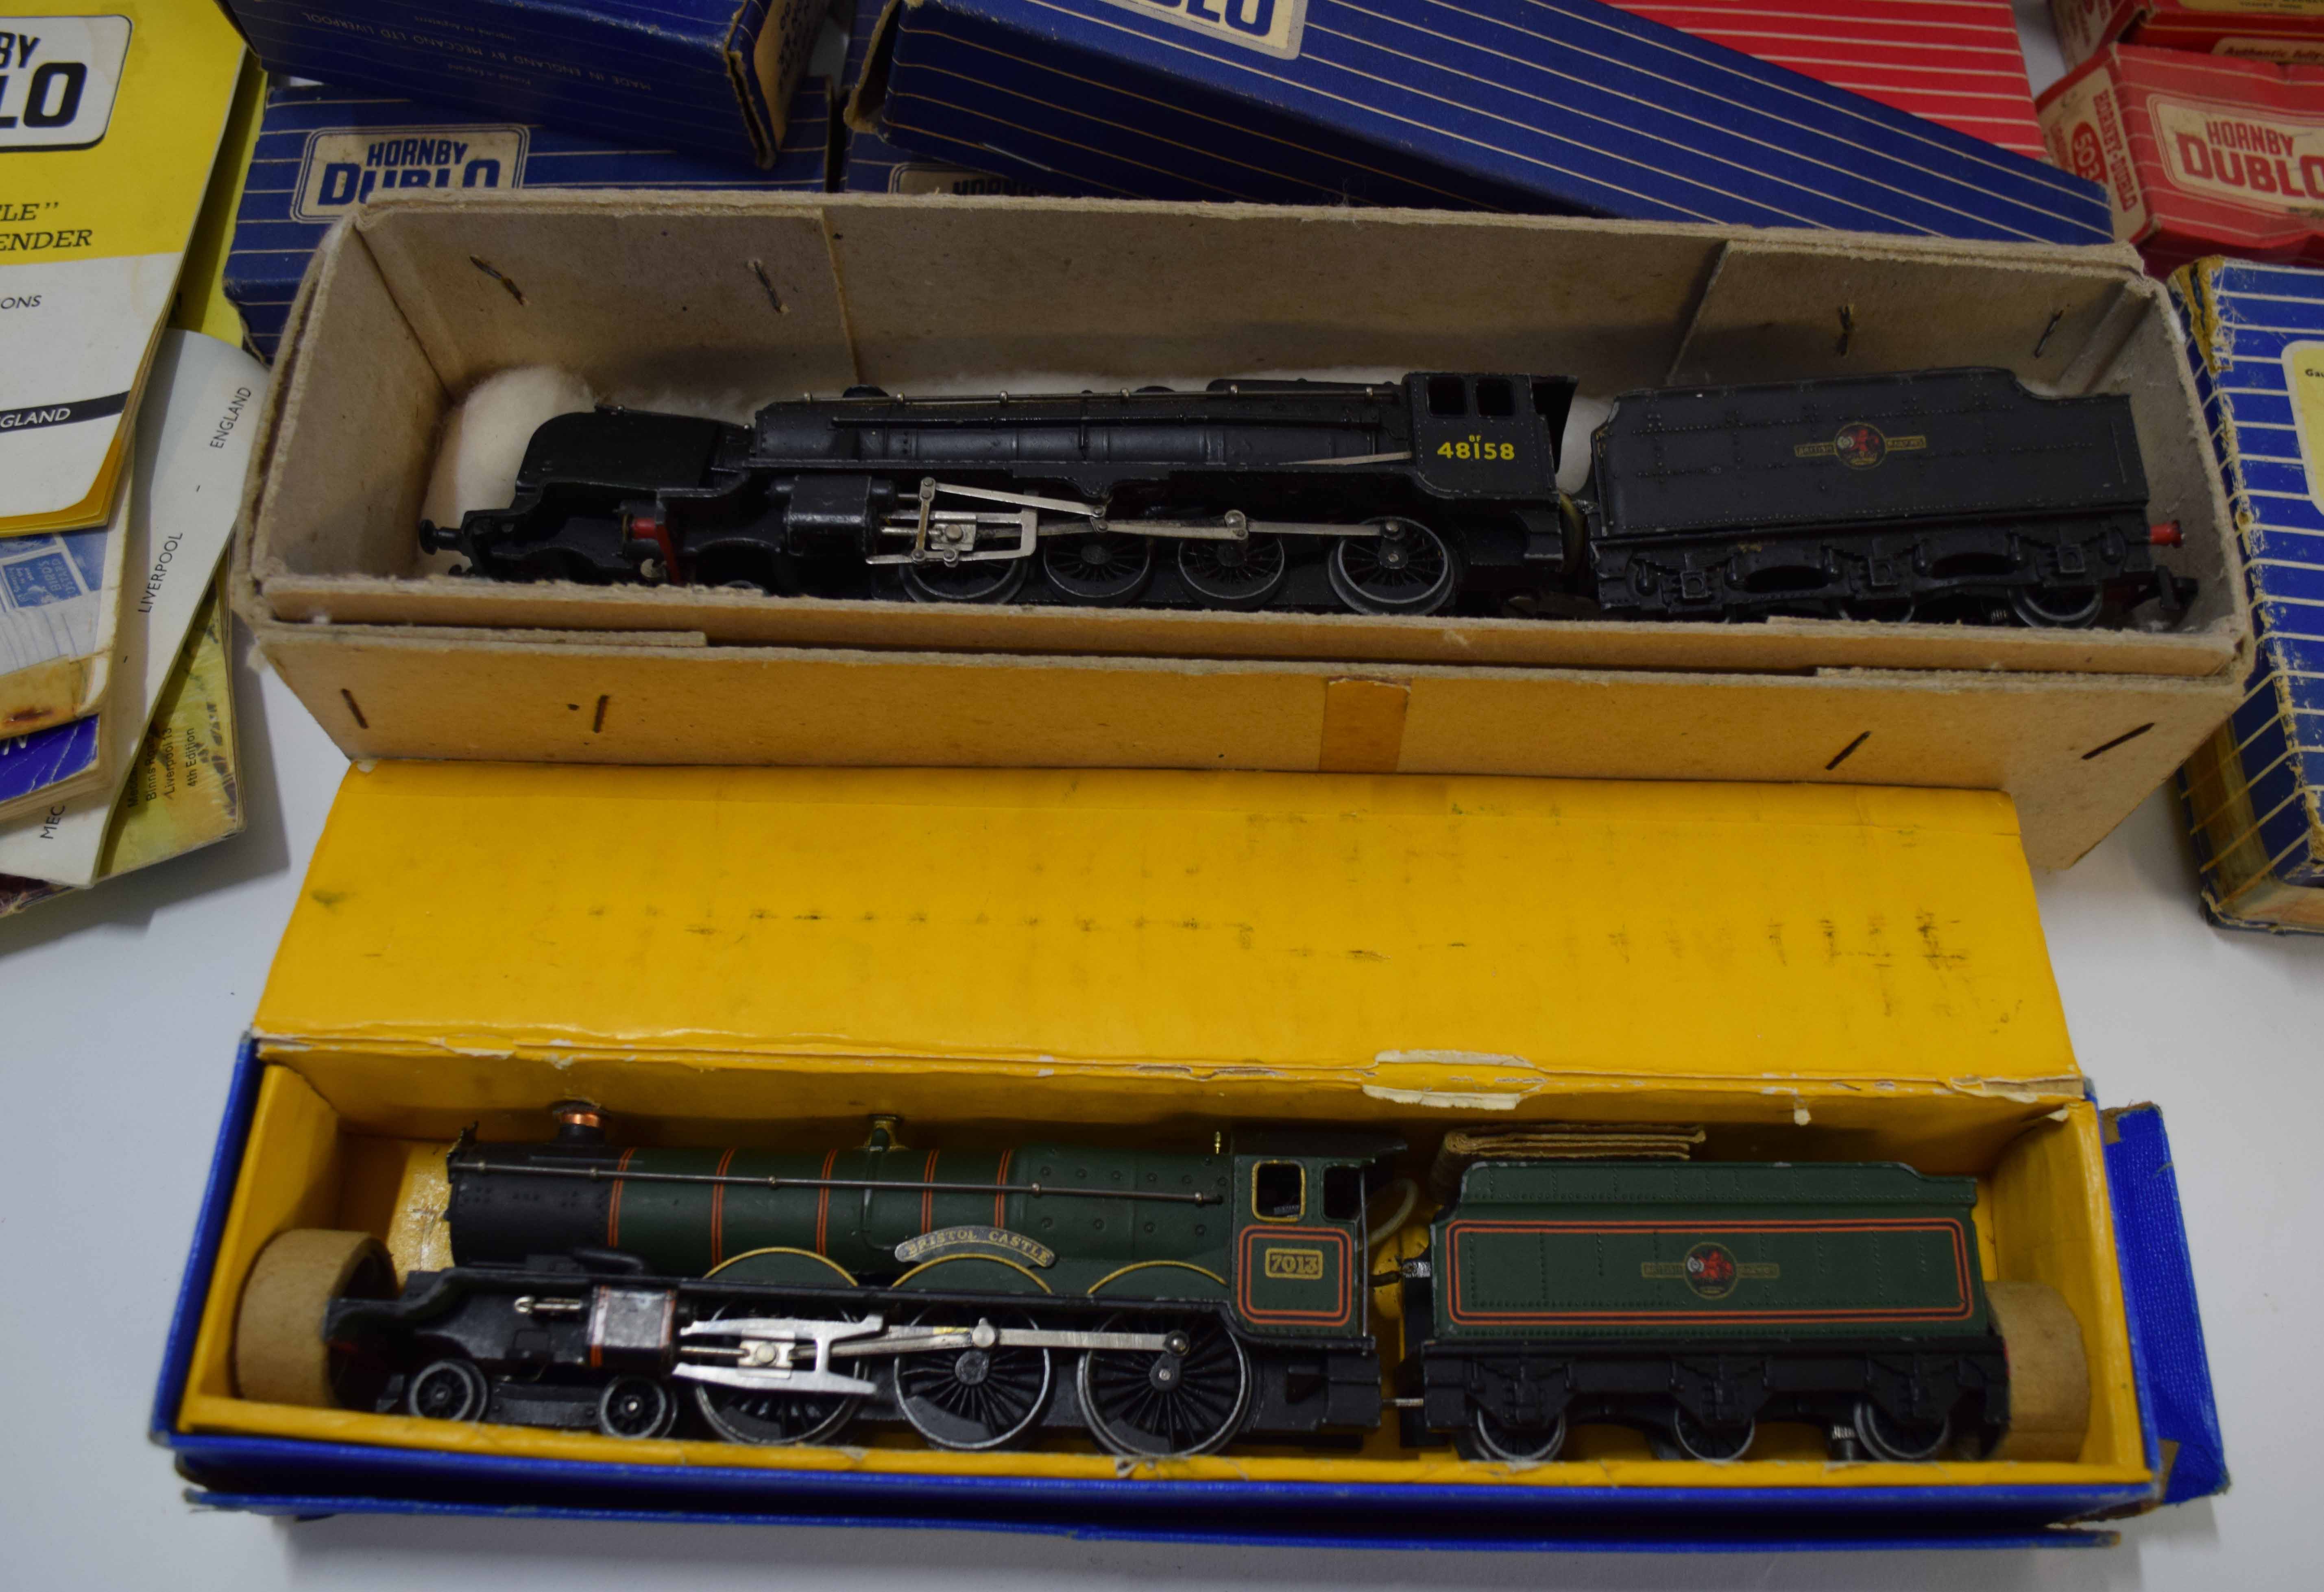 Large quantity of Hornby Dublo railway accessories to include level crossings, signals, island - Image 2 of 2